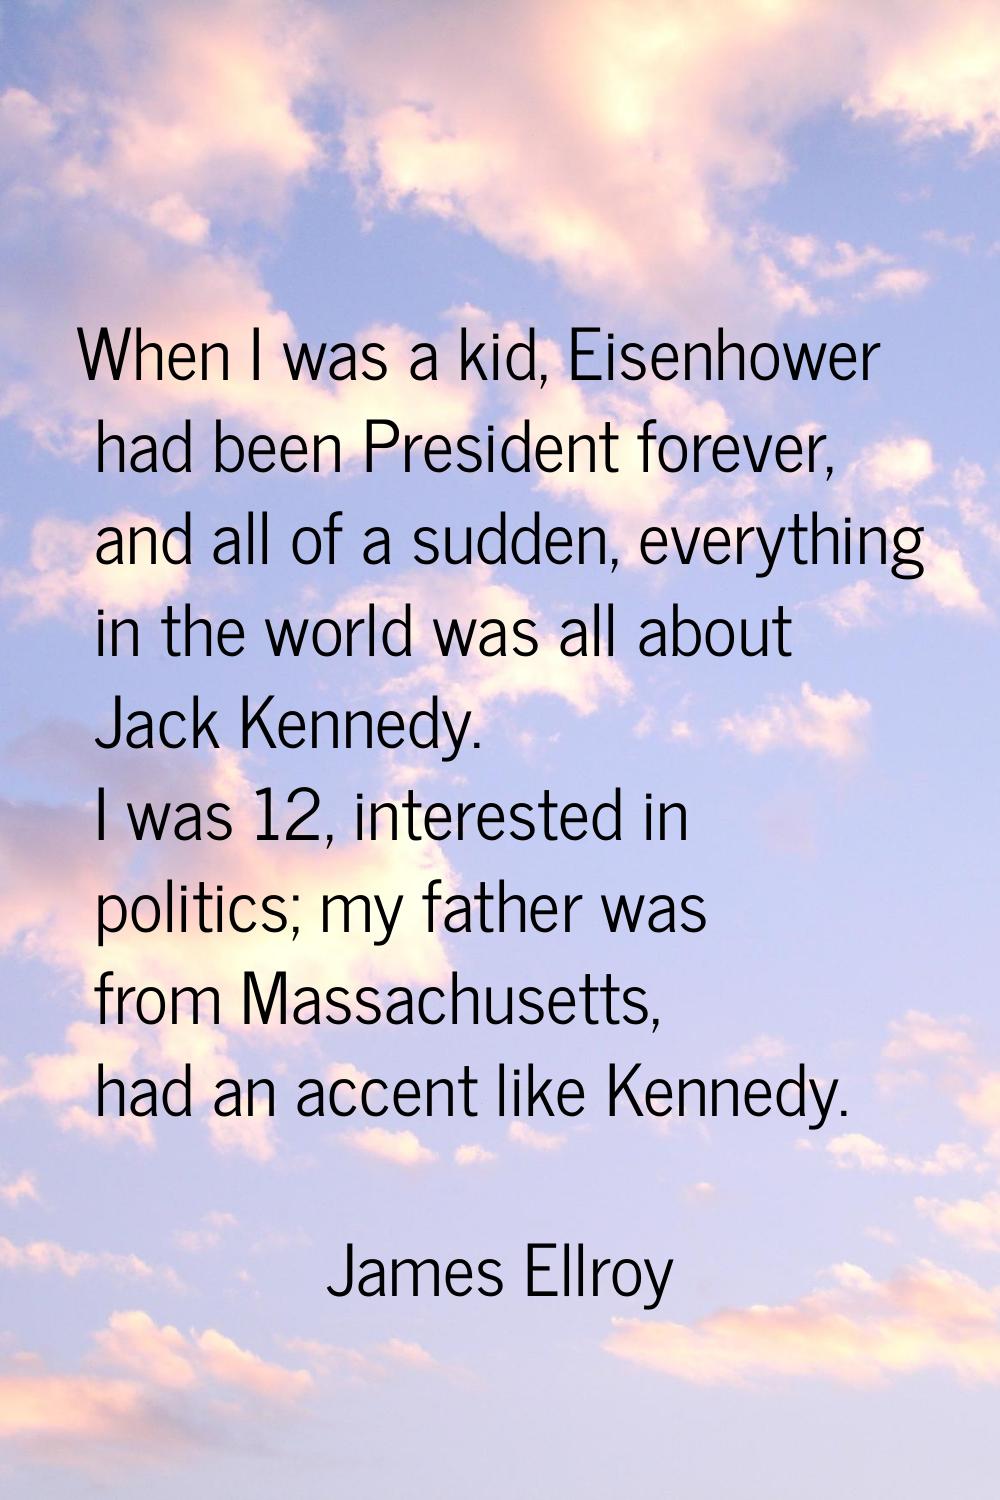 When I was a kid, Eisenhower had been President forever, and all of a sudden, everything in the wor